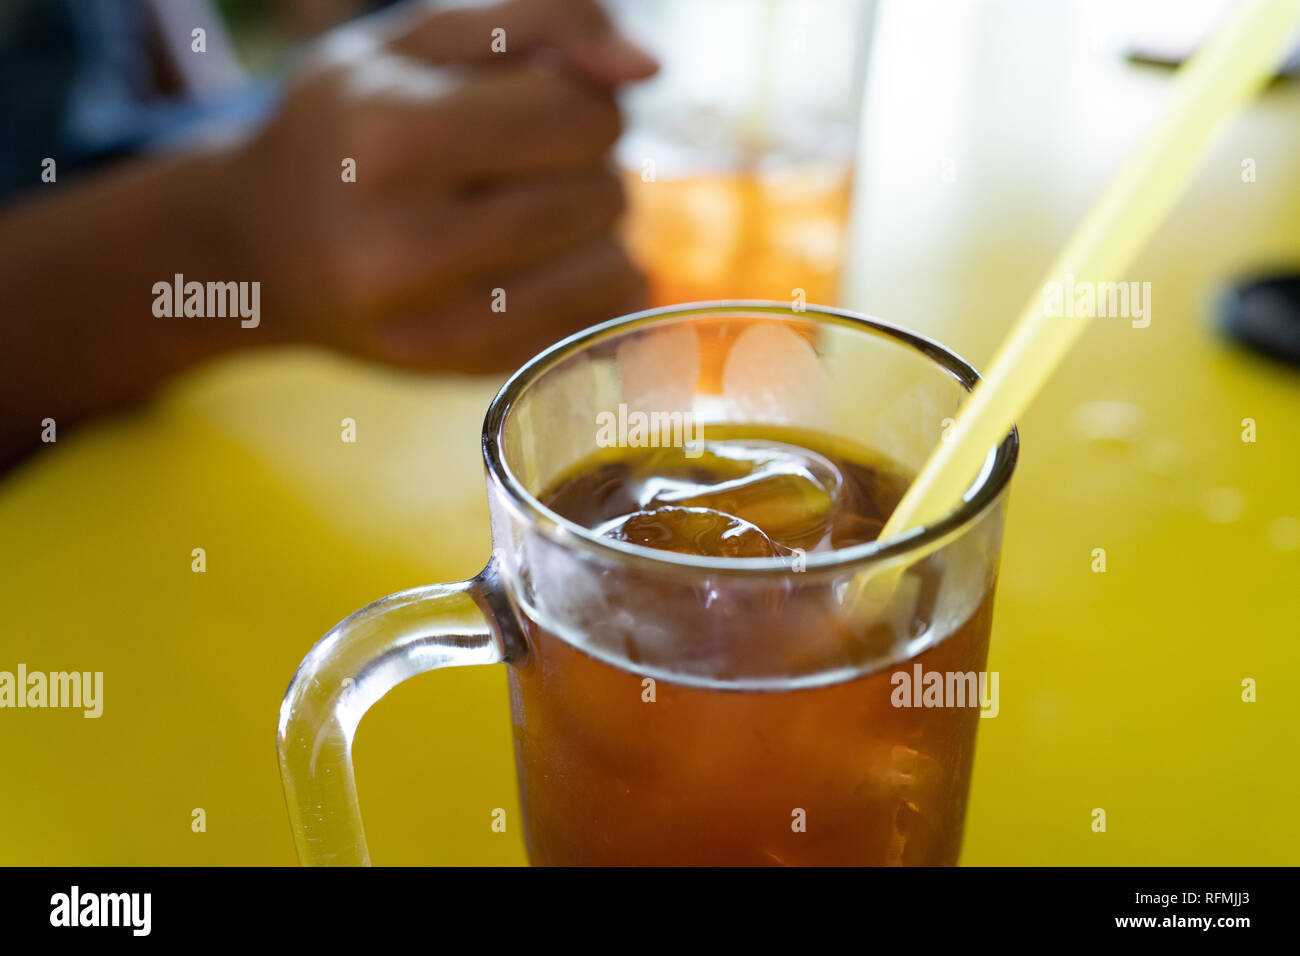 ice tea a kind of beverage with authentic aroma and taste Stock Photo